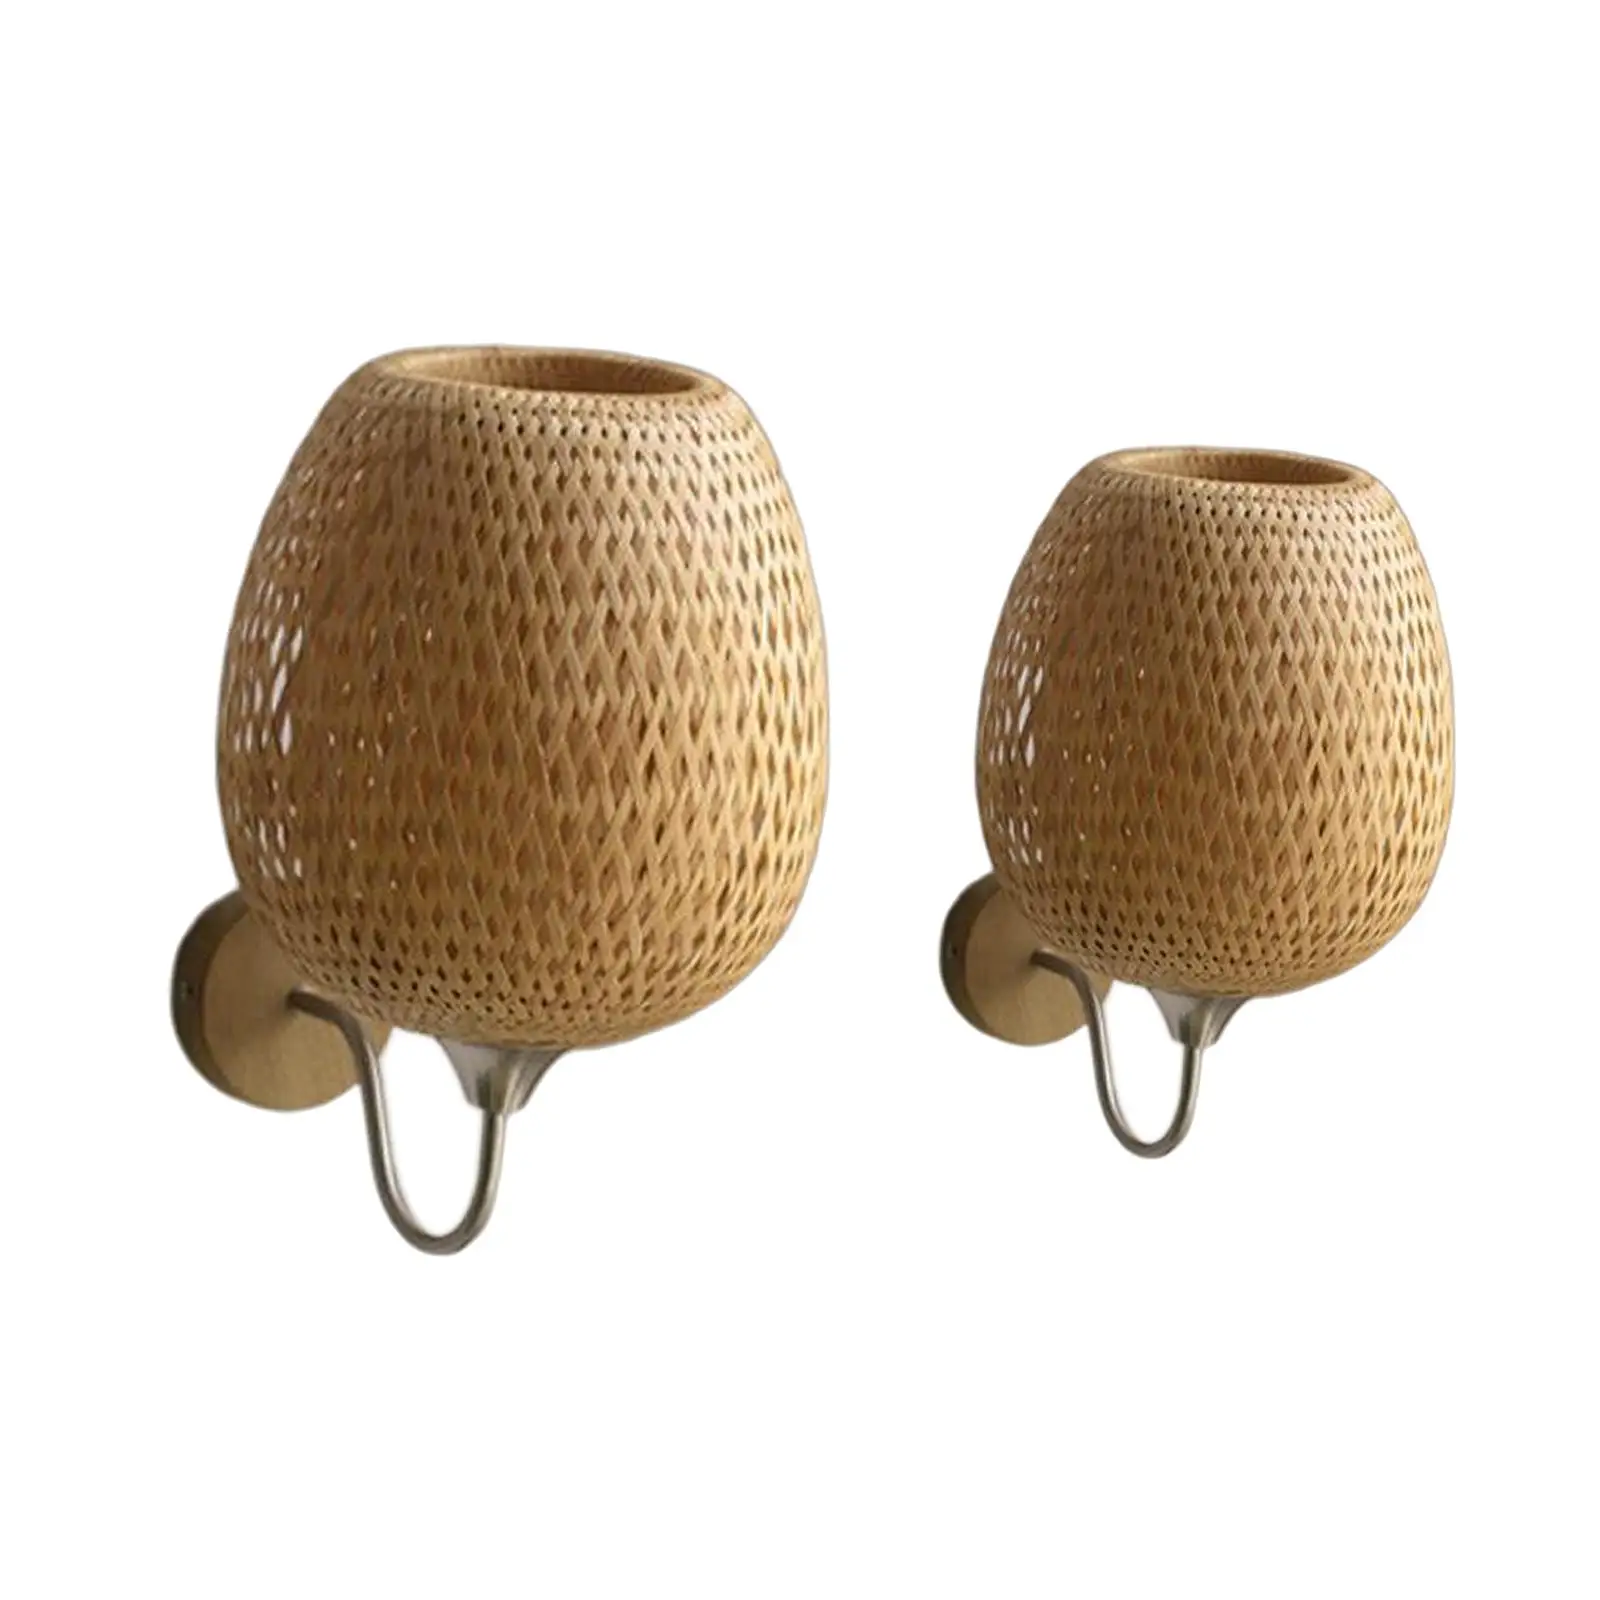 Rattan Bamboo Wall Sconce Light Fixture Vintage Lighting Fixture for Porch